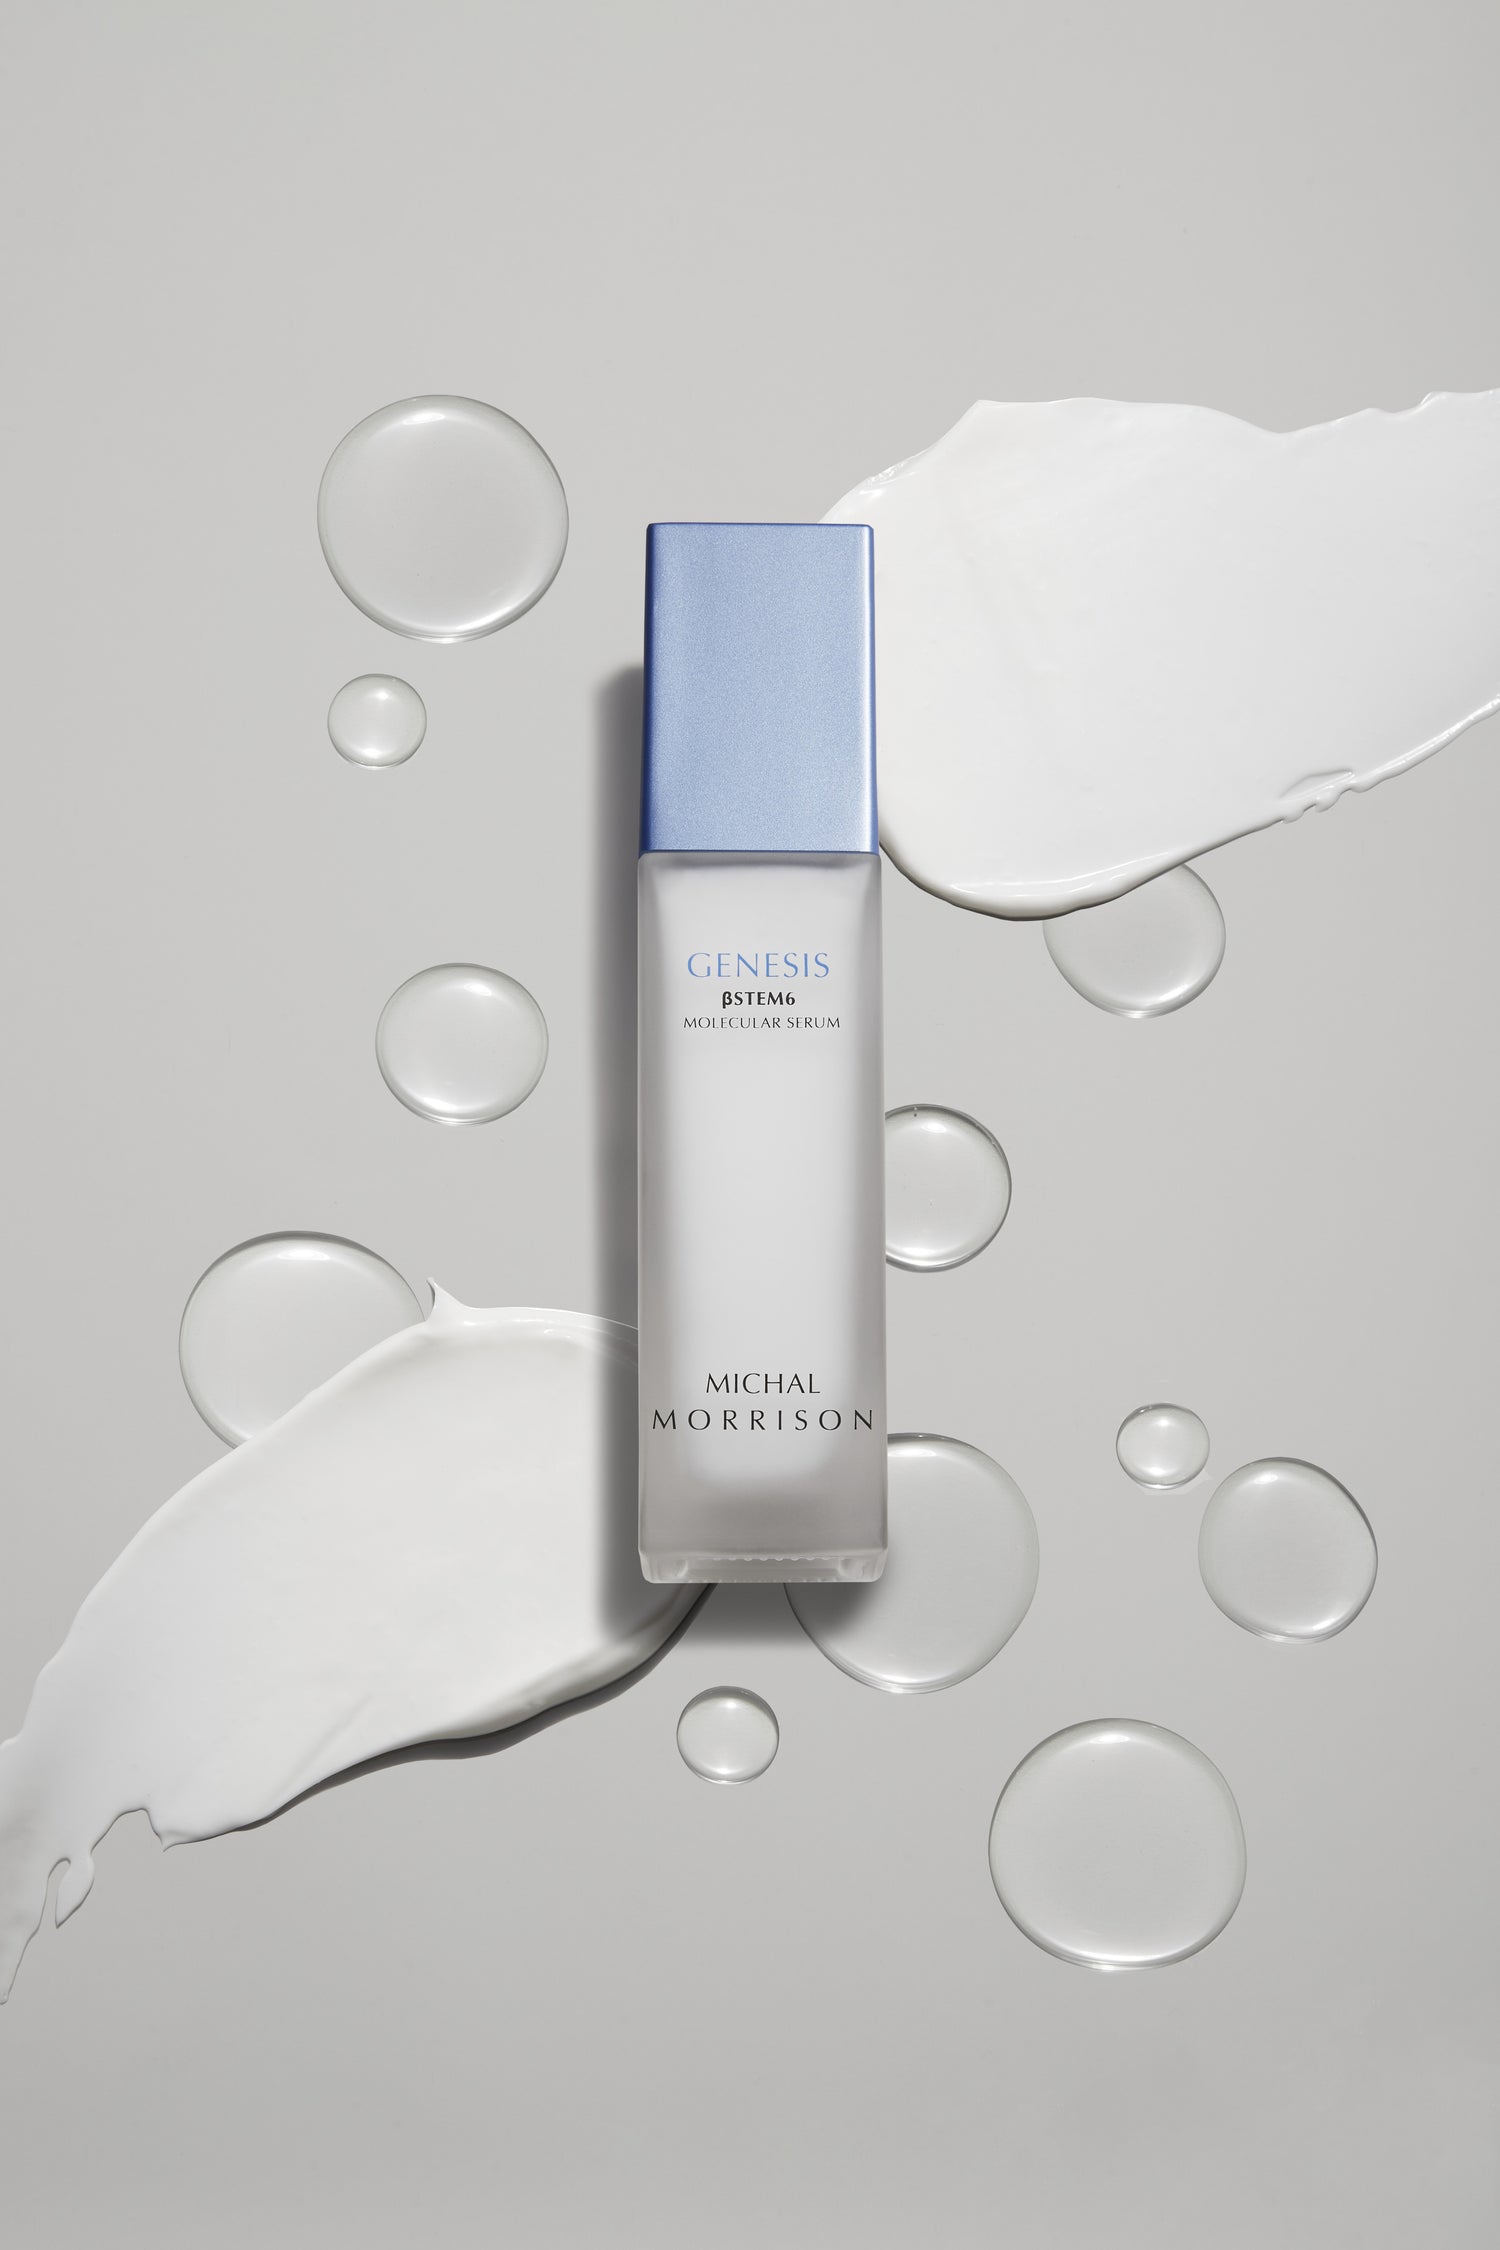 Photo of Genesis BSTEM6 serum in transparent bottle with a periwinkle rectangle cap, sitting on top of a gray background with transparent droplets and white smears of lotion.